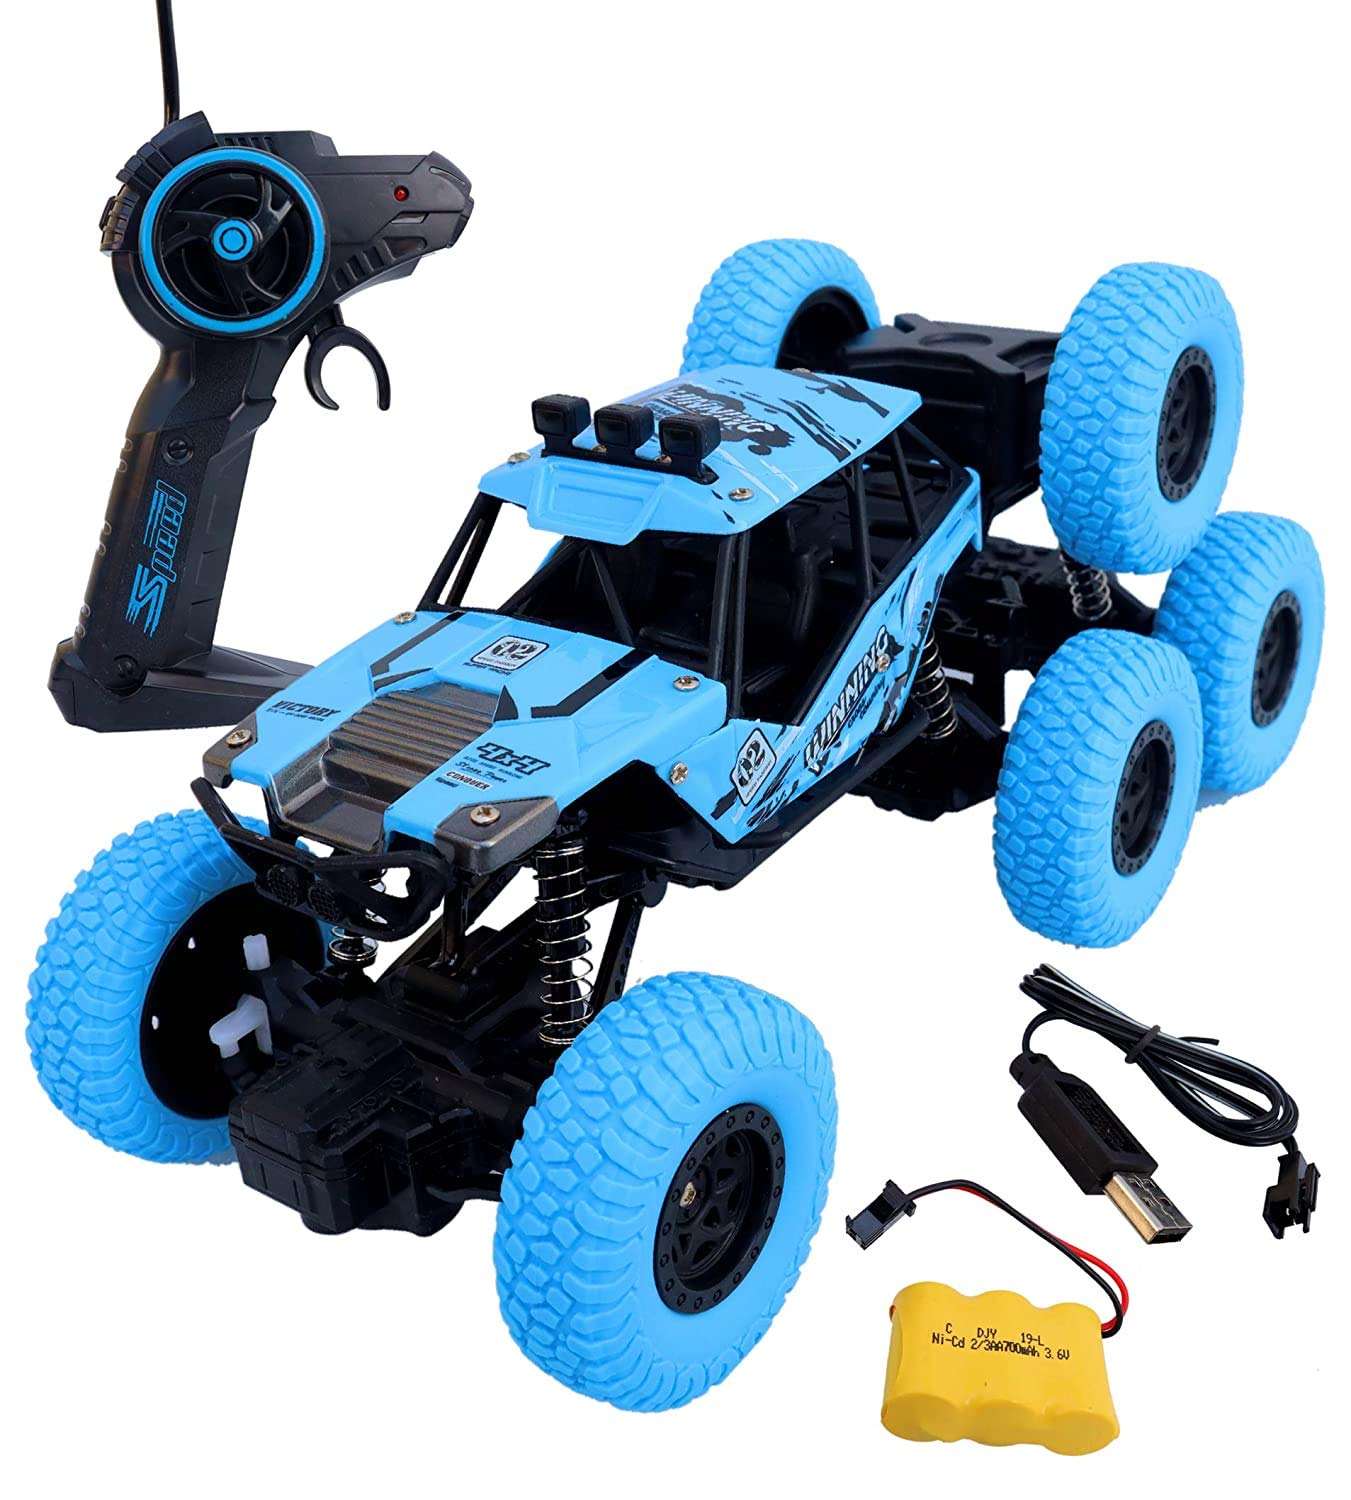 AZi RC (Remote Control) Rock Climber Car 4WD 4 Wheel Drive 8 Wheels Climbing 1:18 Rechargeable Monster Truck Car Off-Road Car Kids Toys Gift